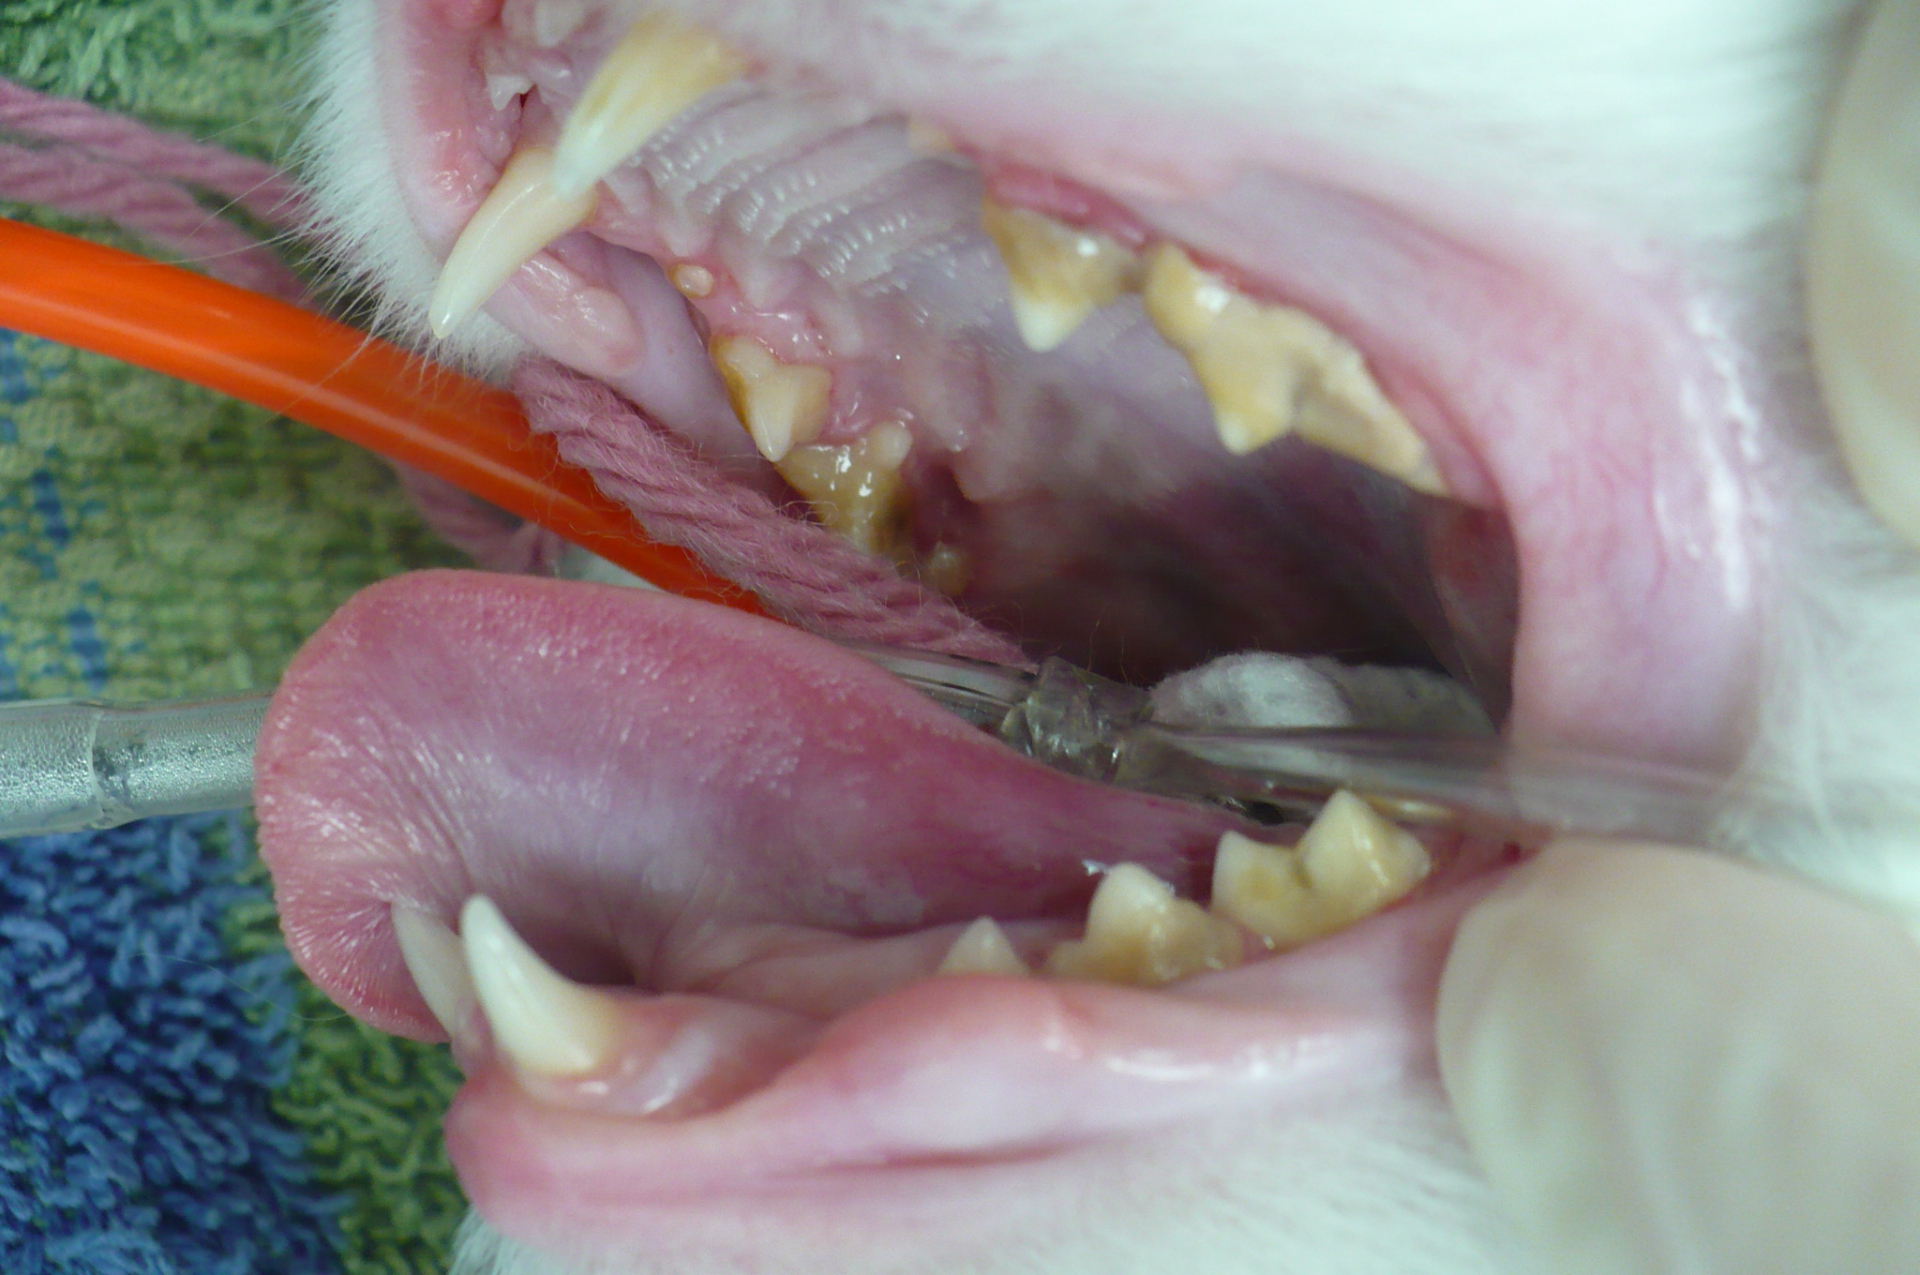 This cat has a lot of calculus on the inside of the teeth as well.